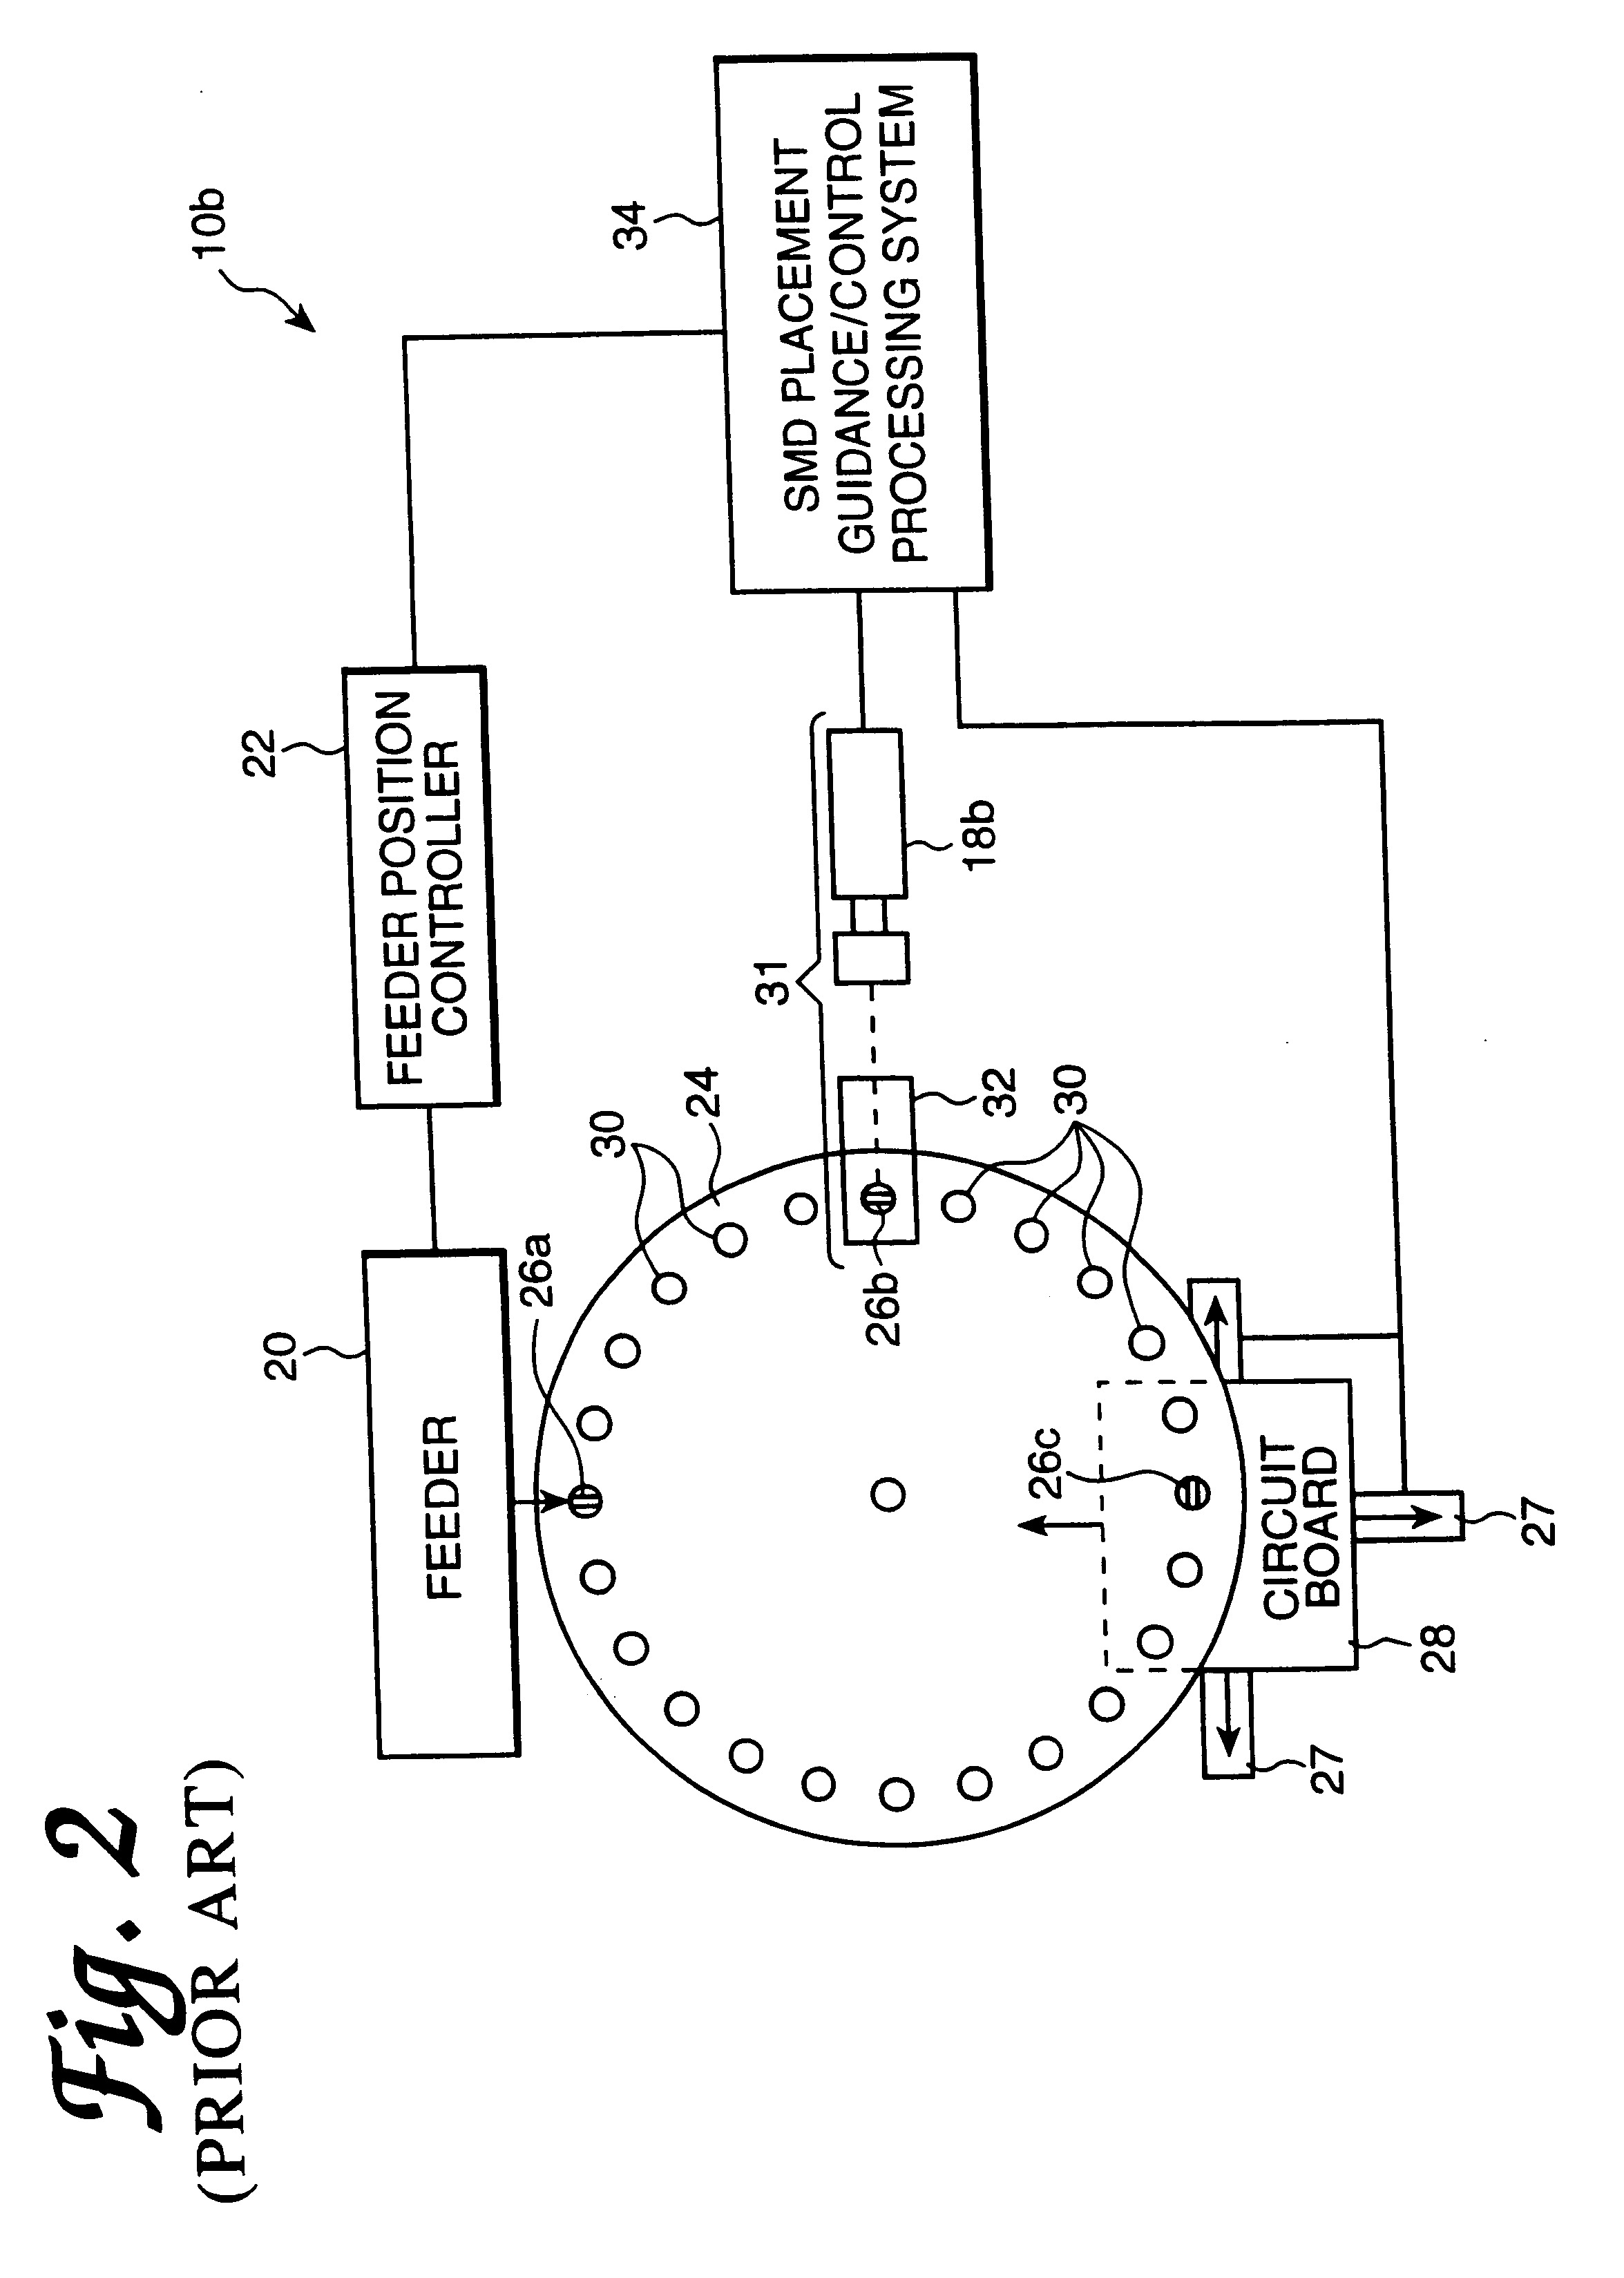 Machine vision system for identifying and assessing features of an article